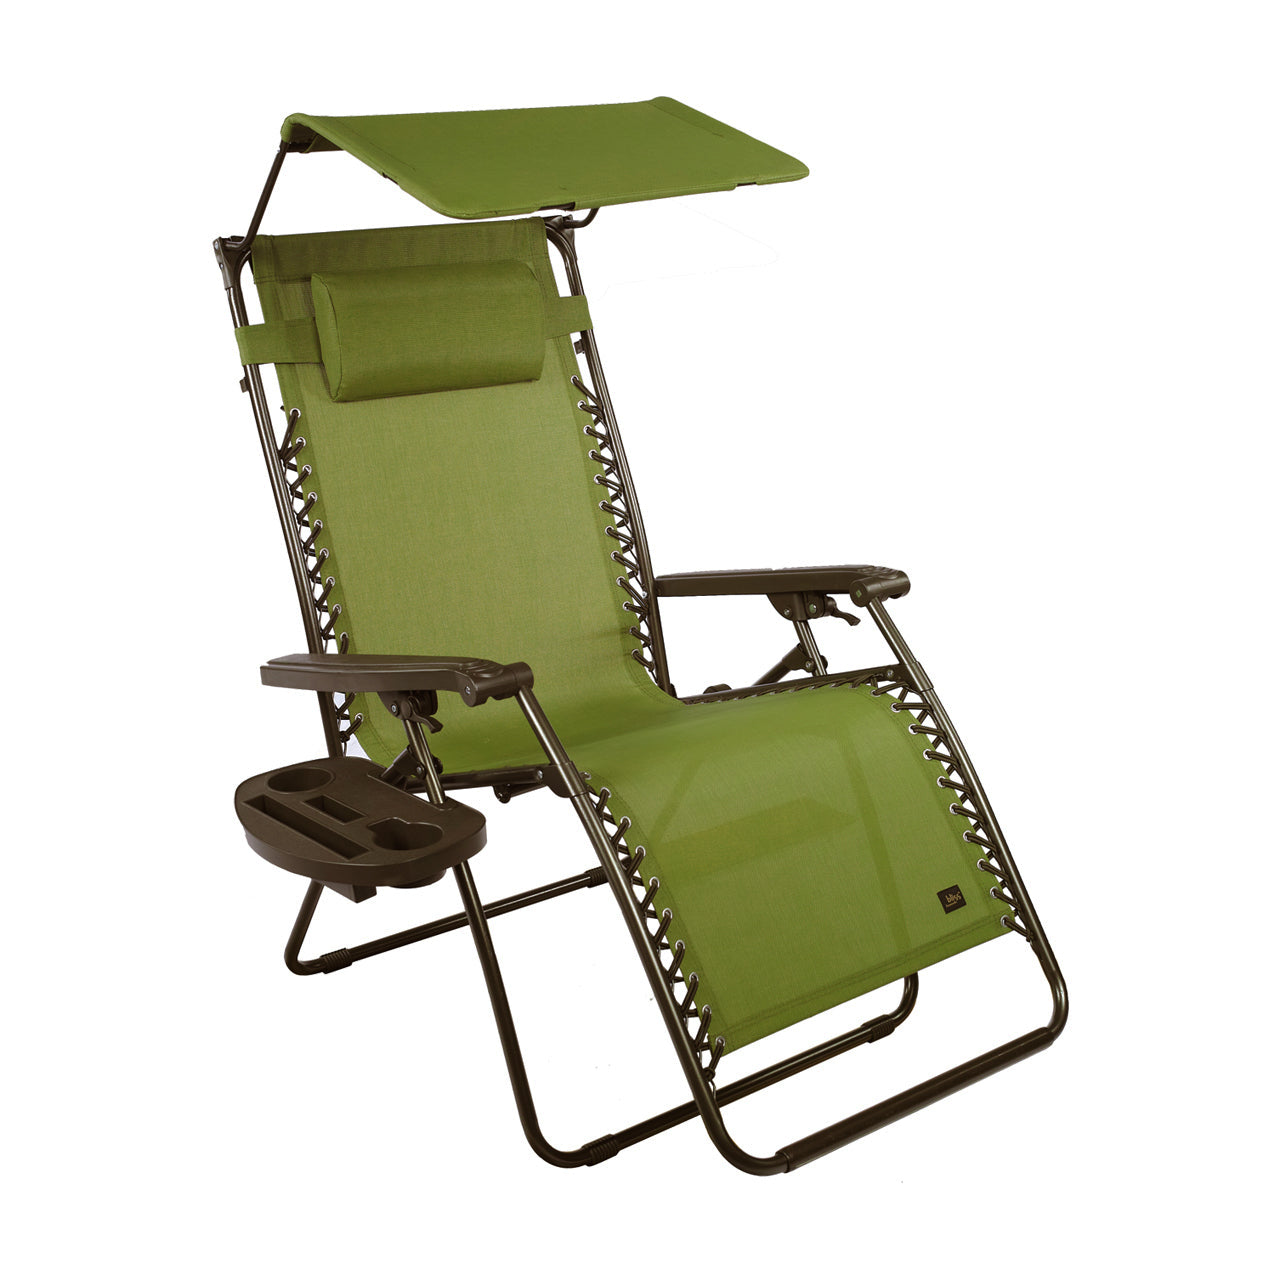 Bliss Hammocks 30-inch Wide XL Zero Gravity Chair with Adjustable Canopy Sun-Shade, Drink Tray, and Adjustable Pillow in the sage green variation.